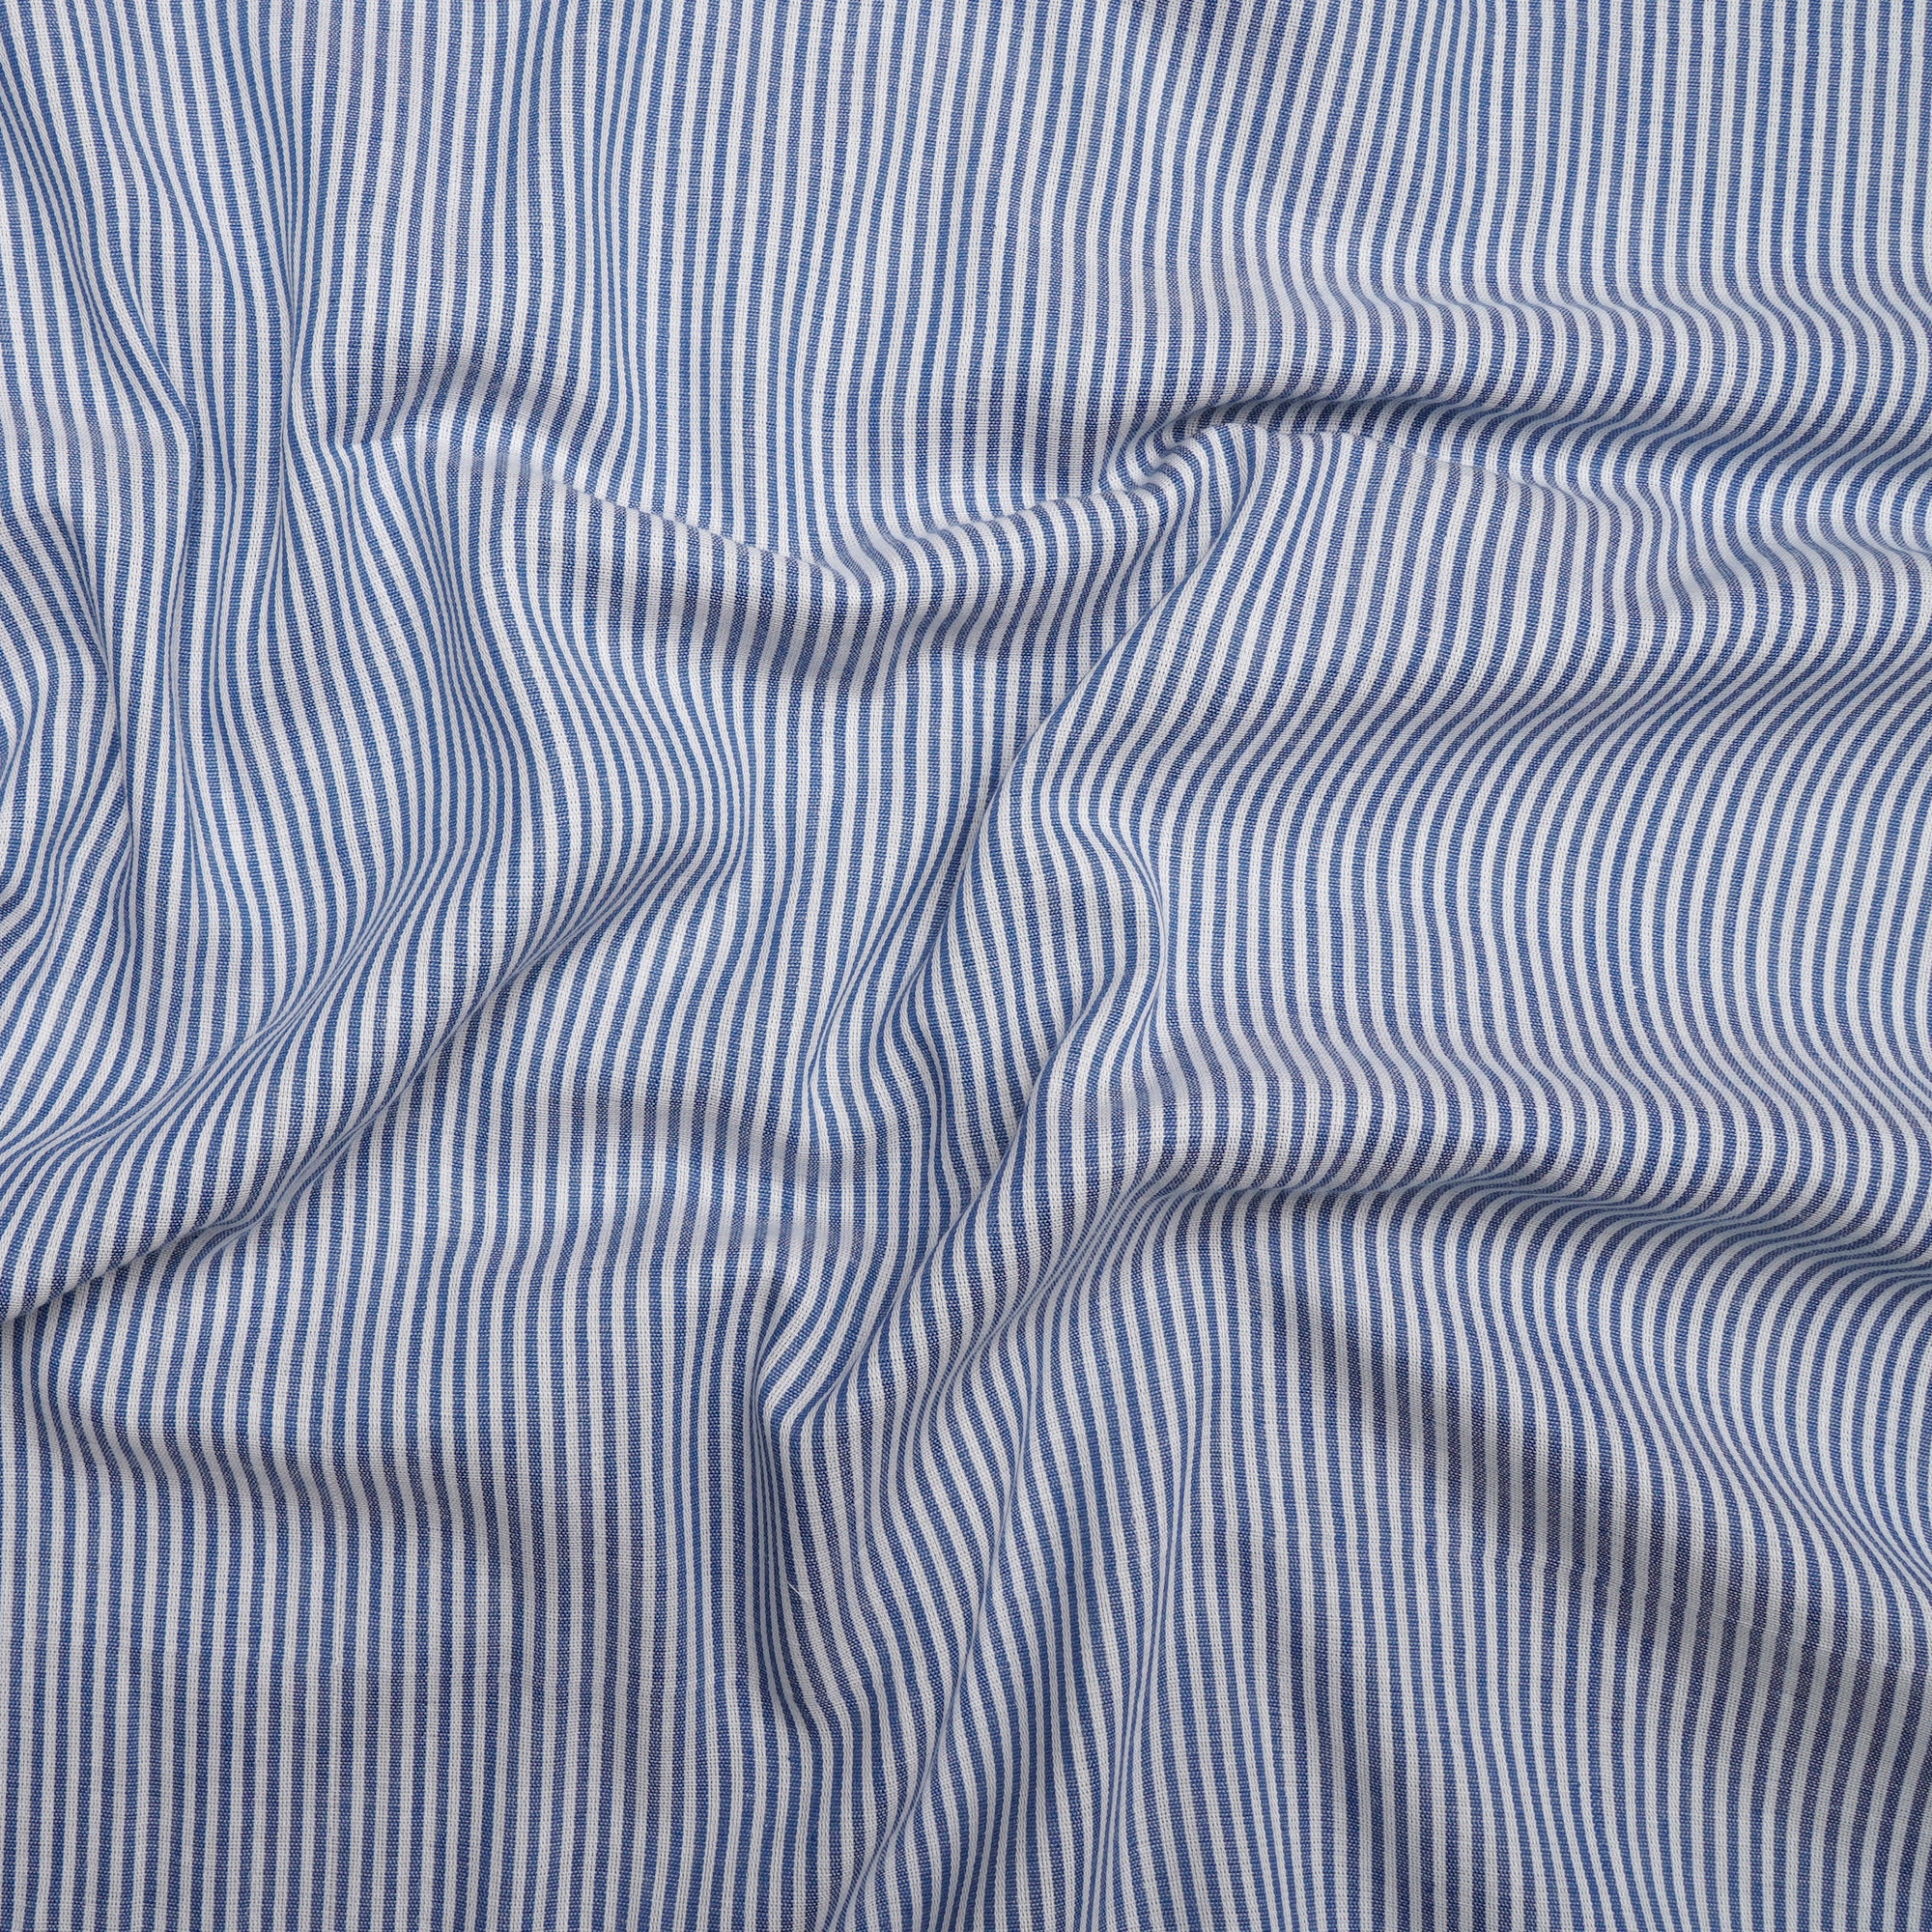 White-Blue Stripe Pattern Loom Textured South Cotton Double Cloth Fabric